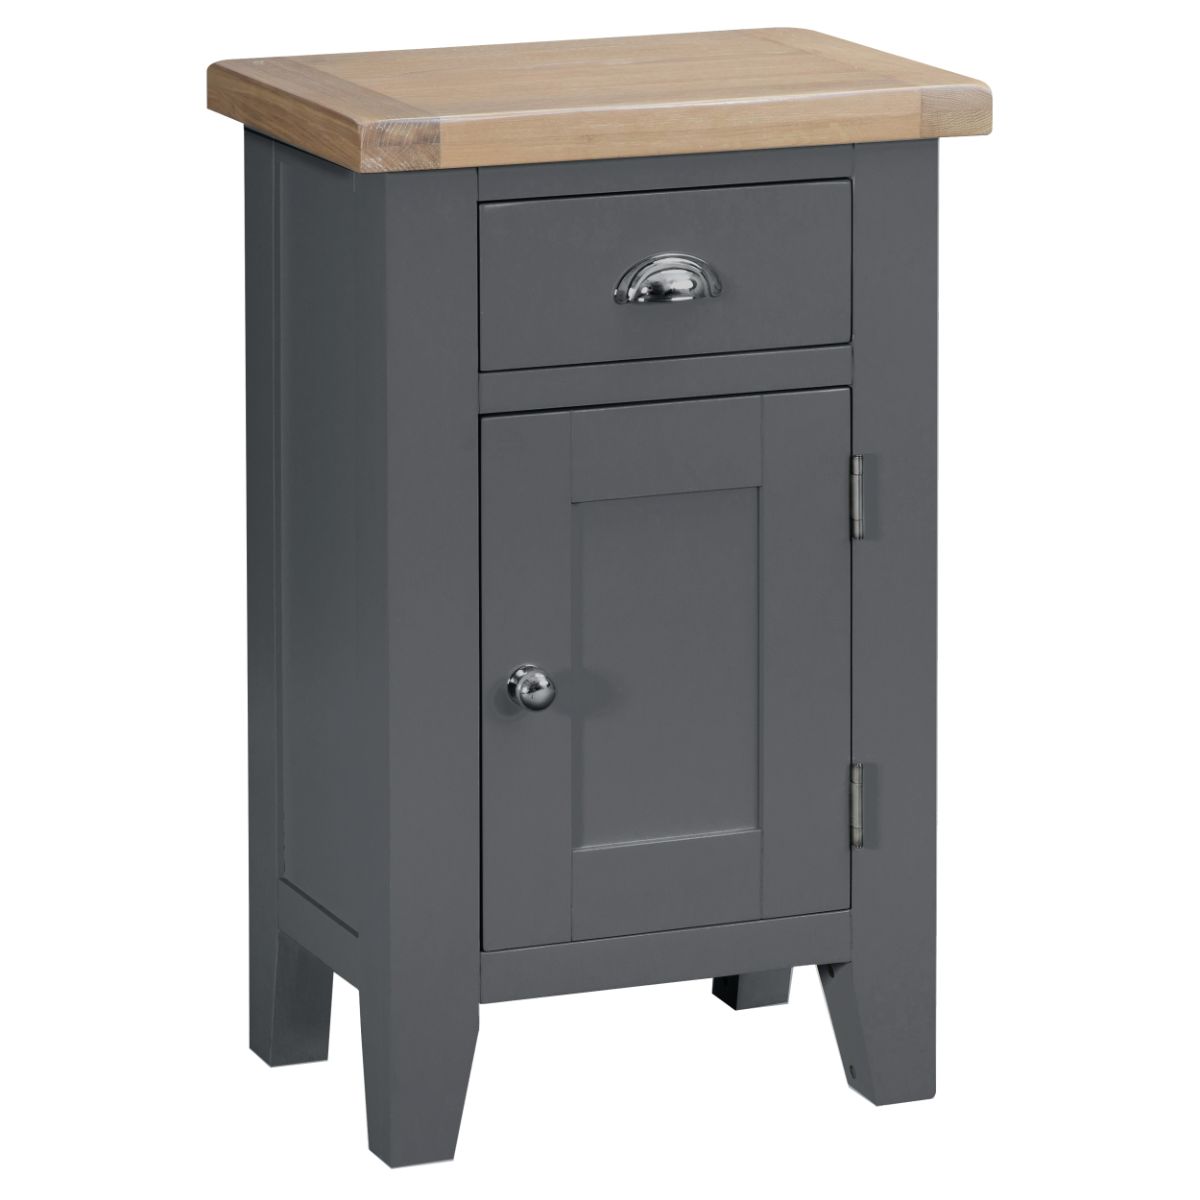 TT Dining-Charcoal Small Cupboard